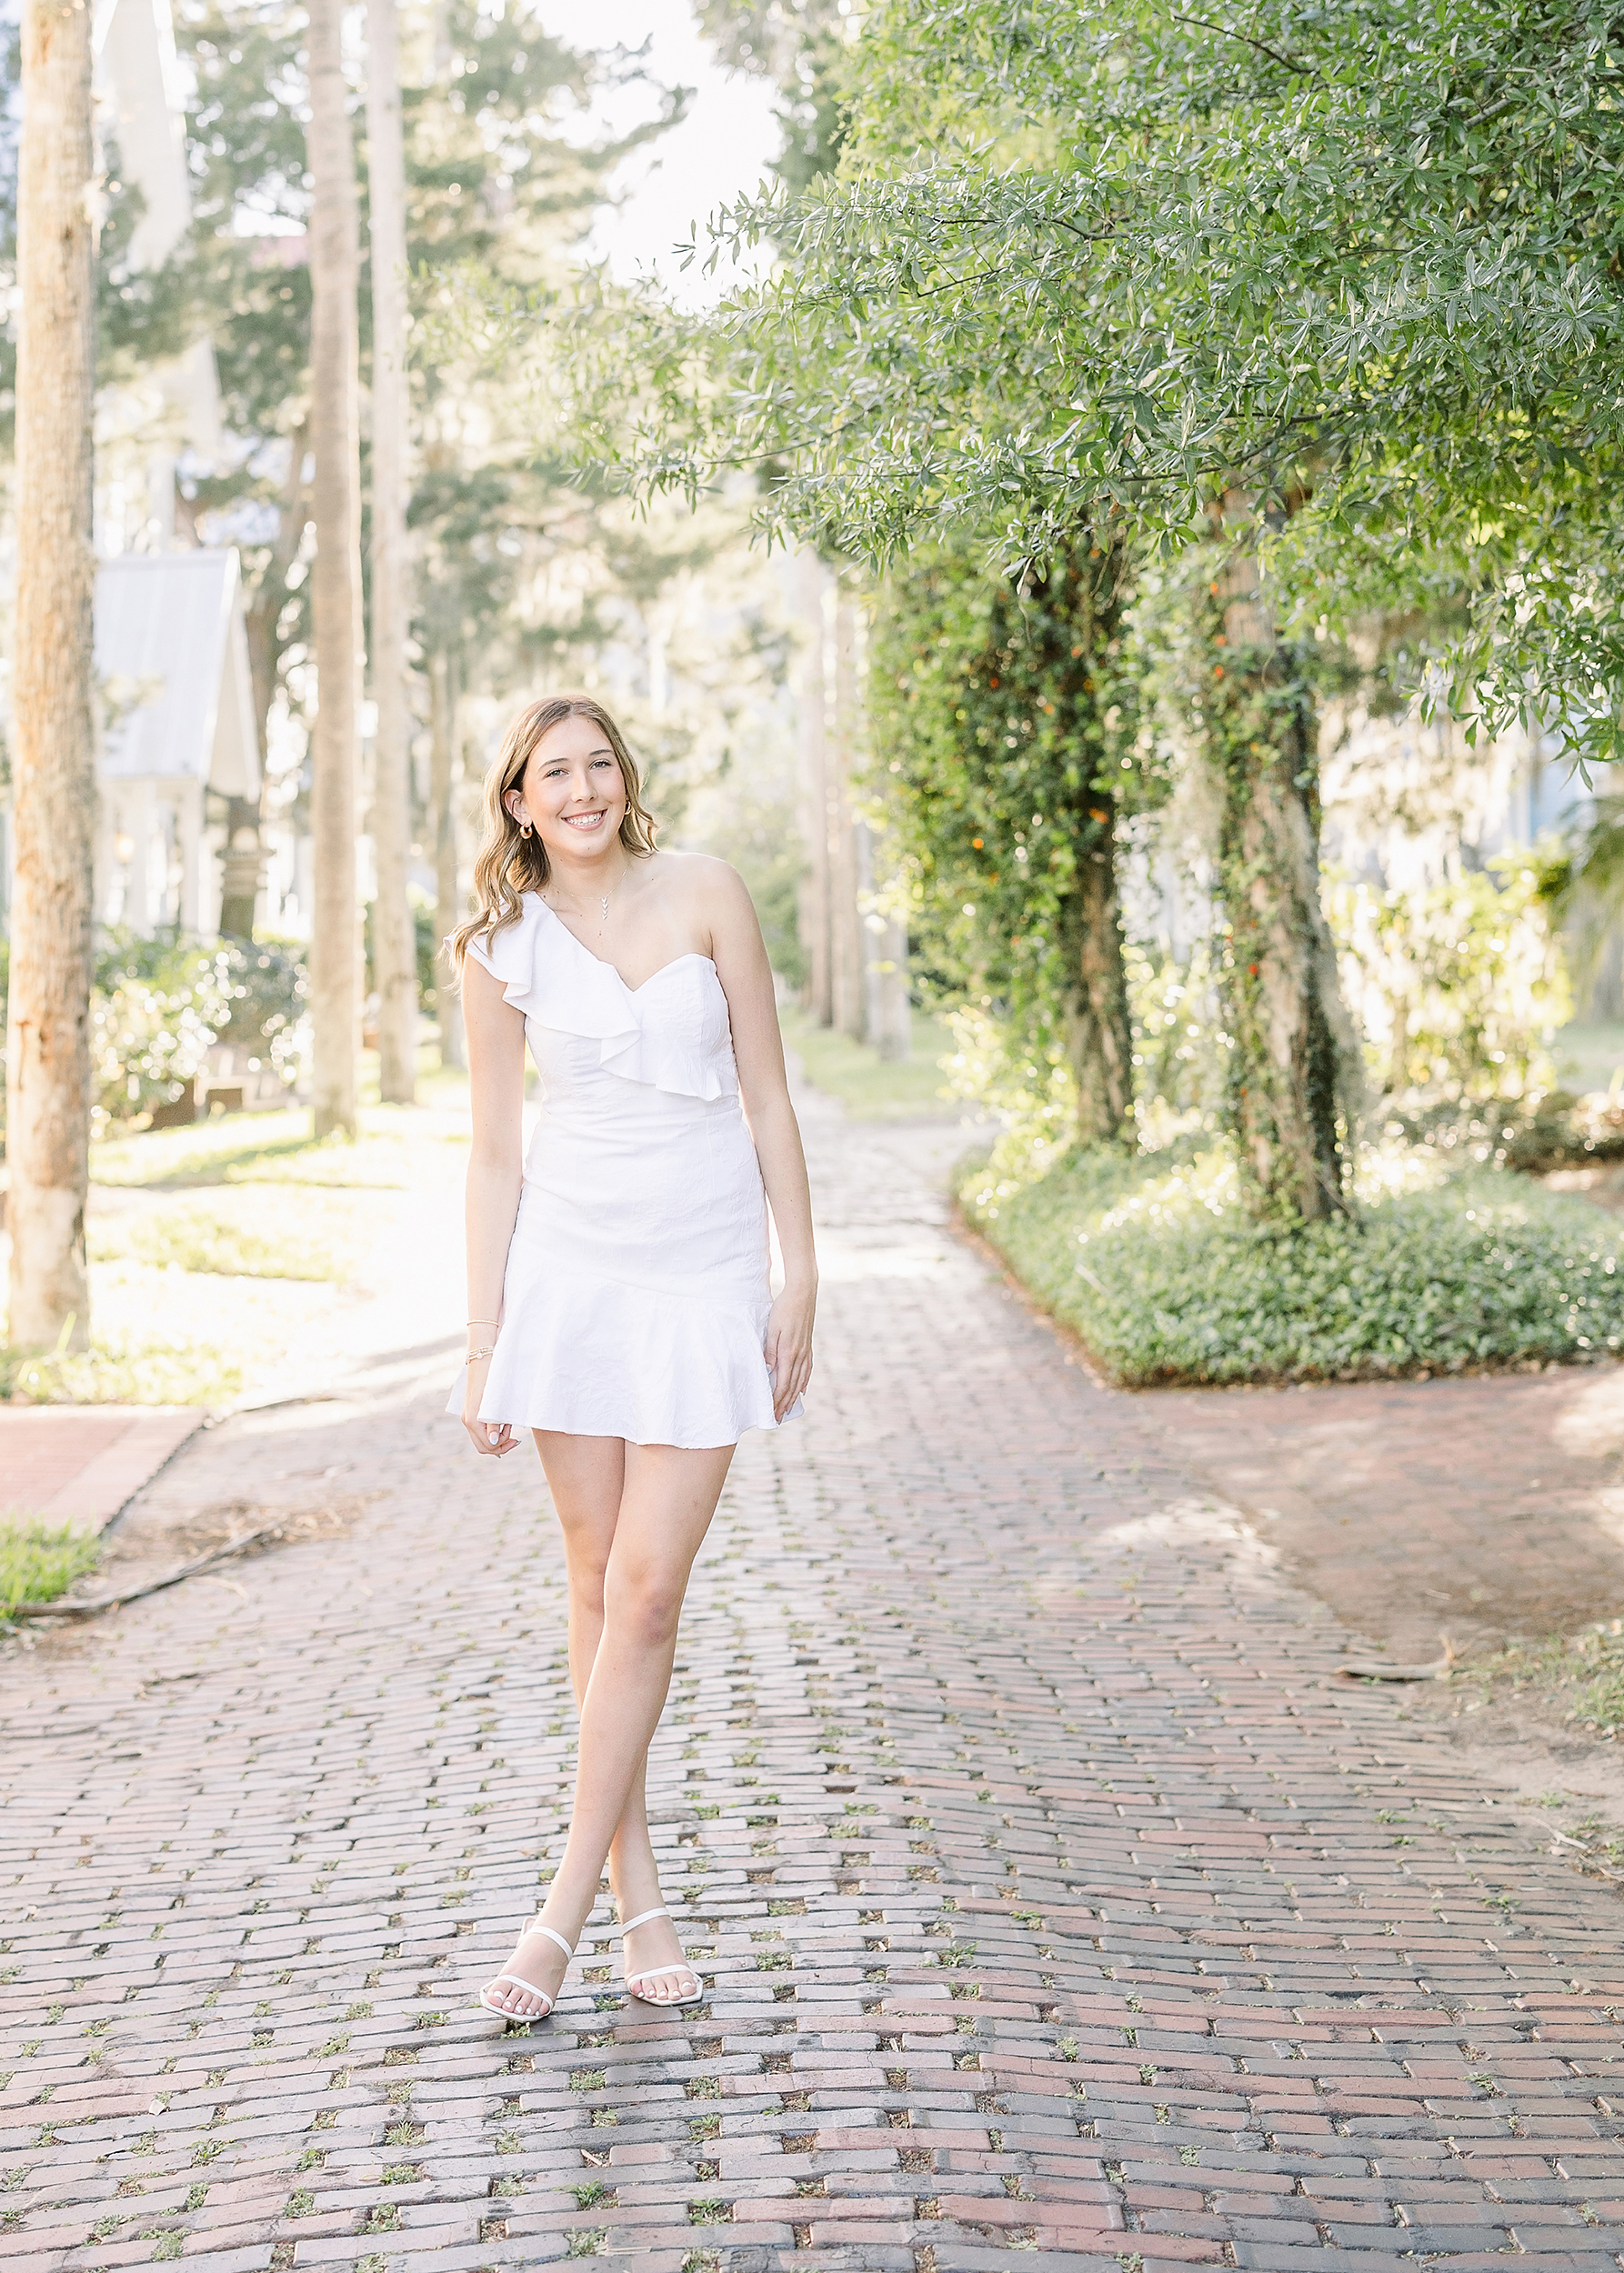 Portrait of a young woman in white dress and white heels standing on a brick road in downtown St. Augustine, Florida.